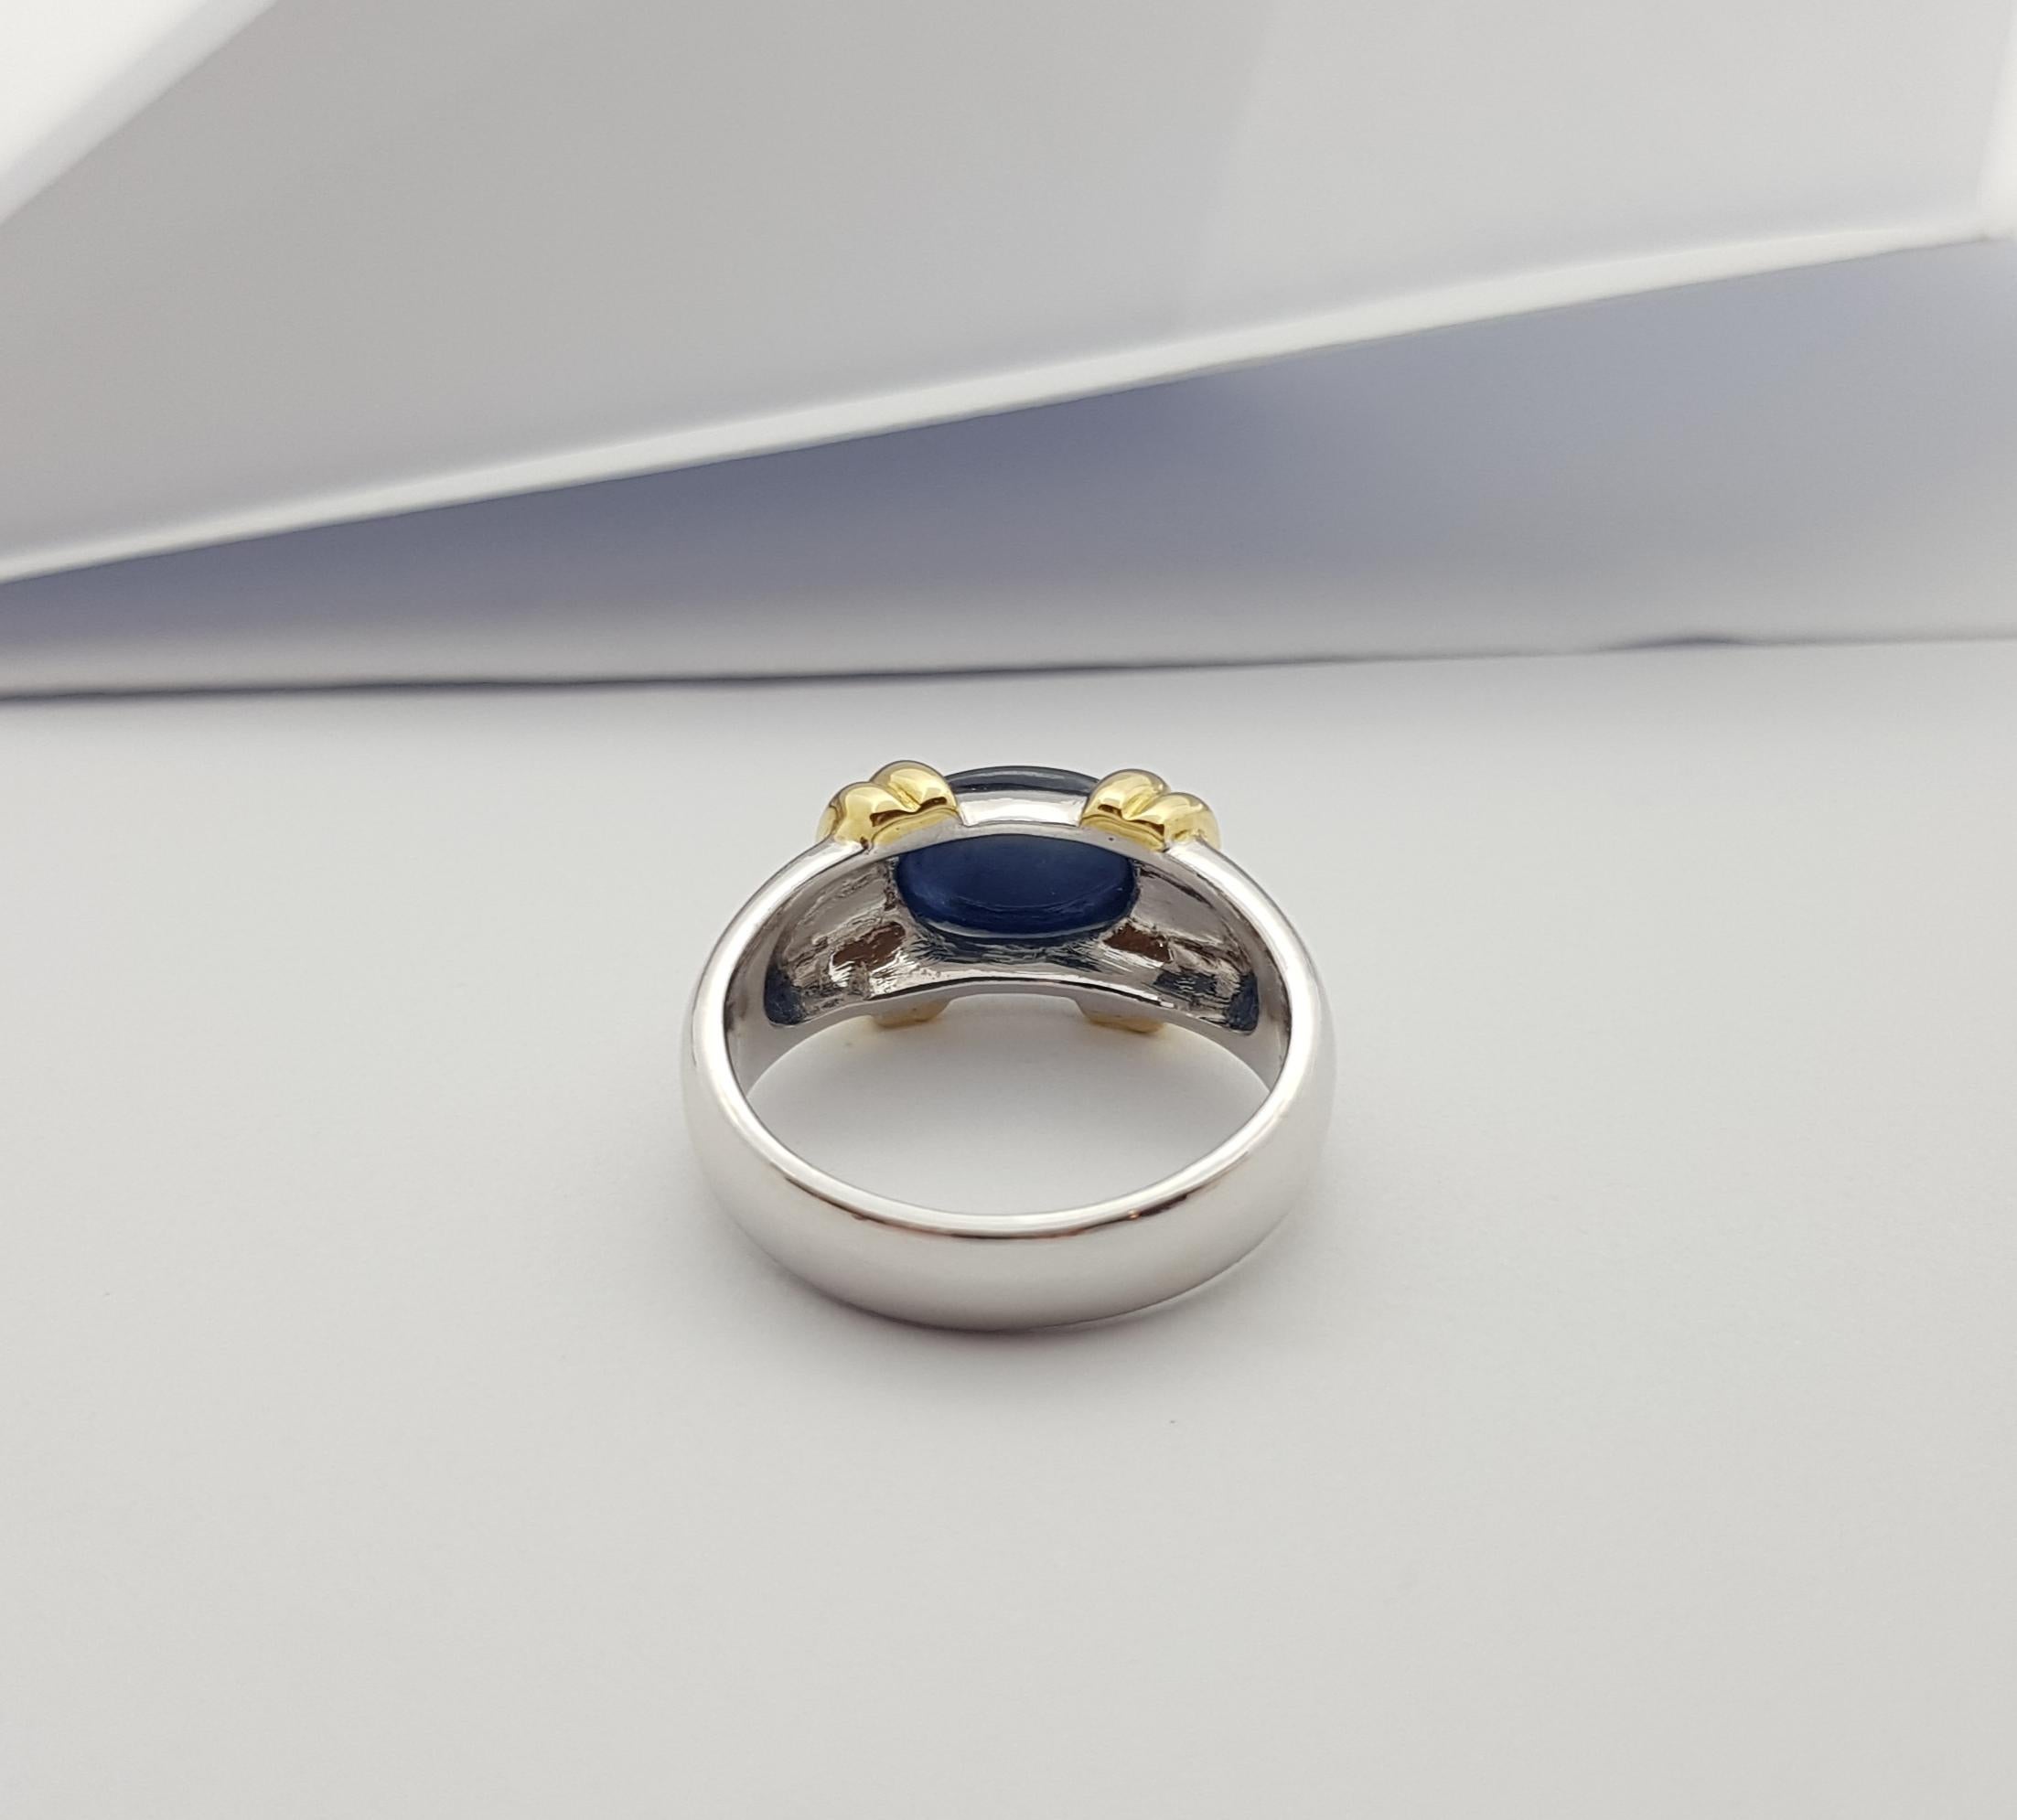 Cabochon Blue Sapphire Ring Set in 18 Karat White Gold Settings For Sale 6